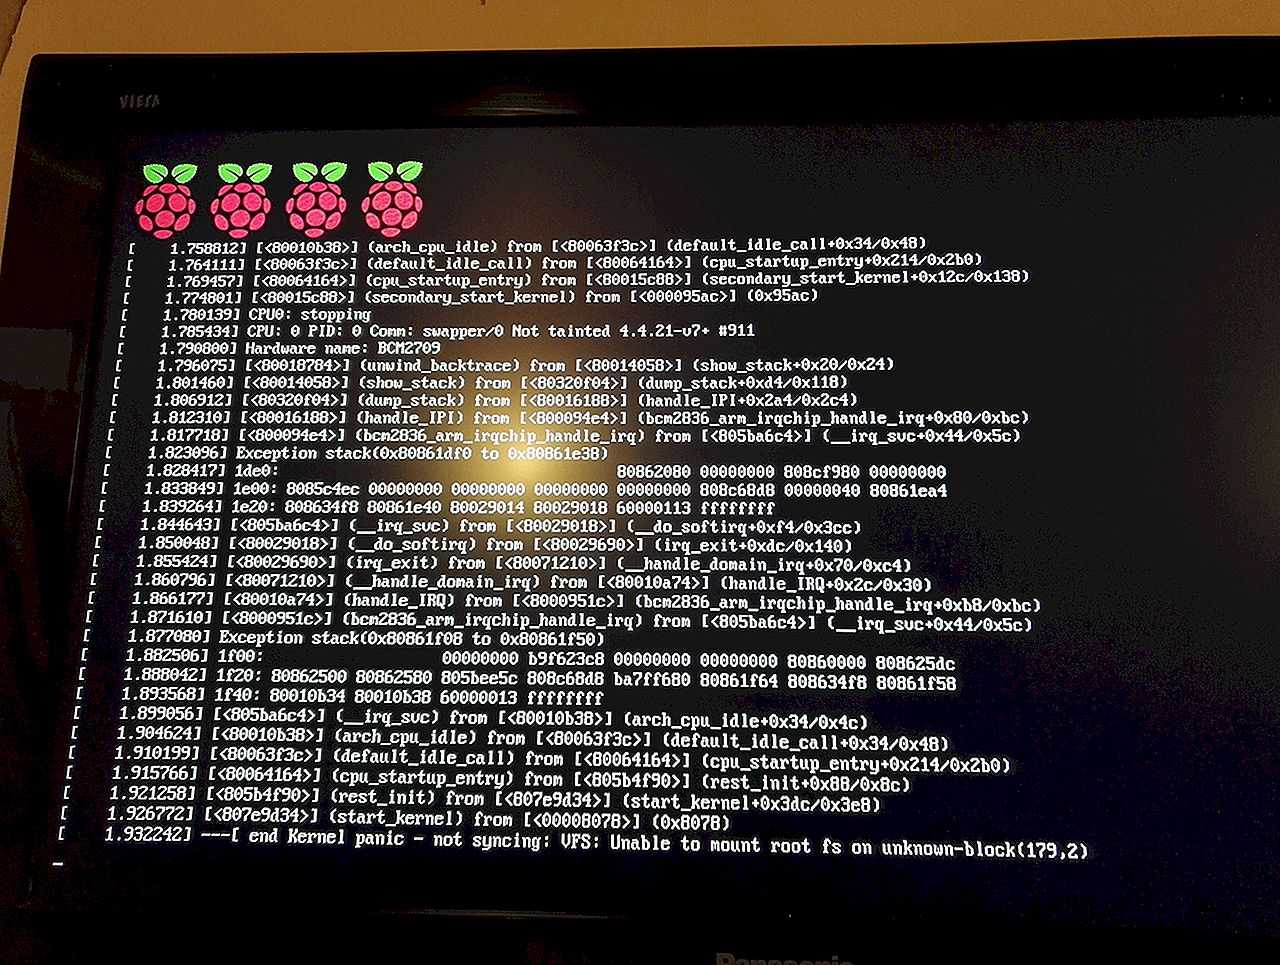 How to restore ubuntu 16.04 “kernel panic – not syncing: vfs: unable to mount root fs on unknown-block(0,0)”